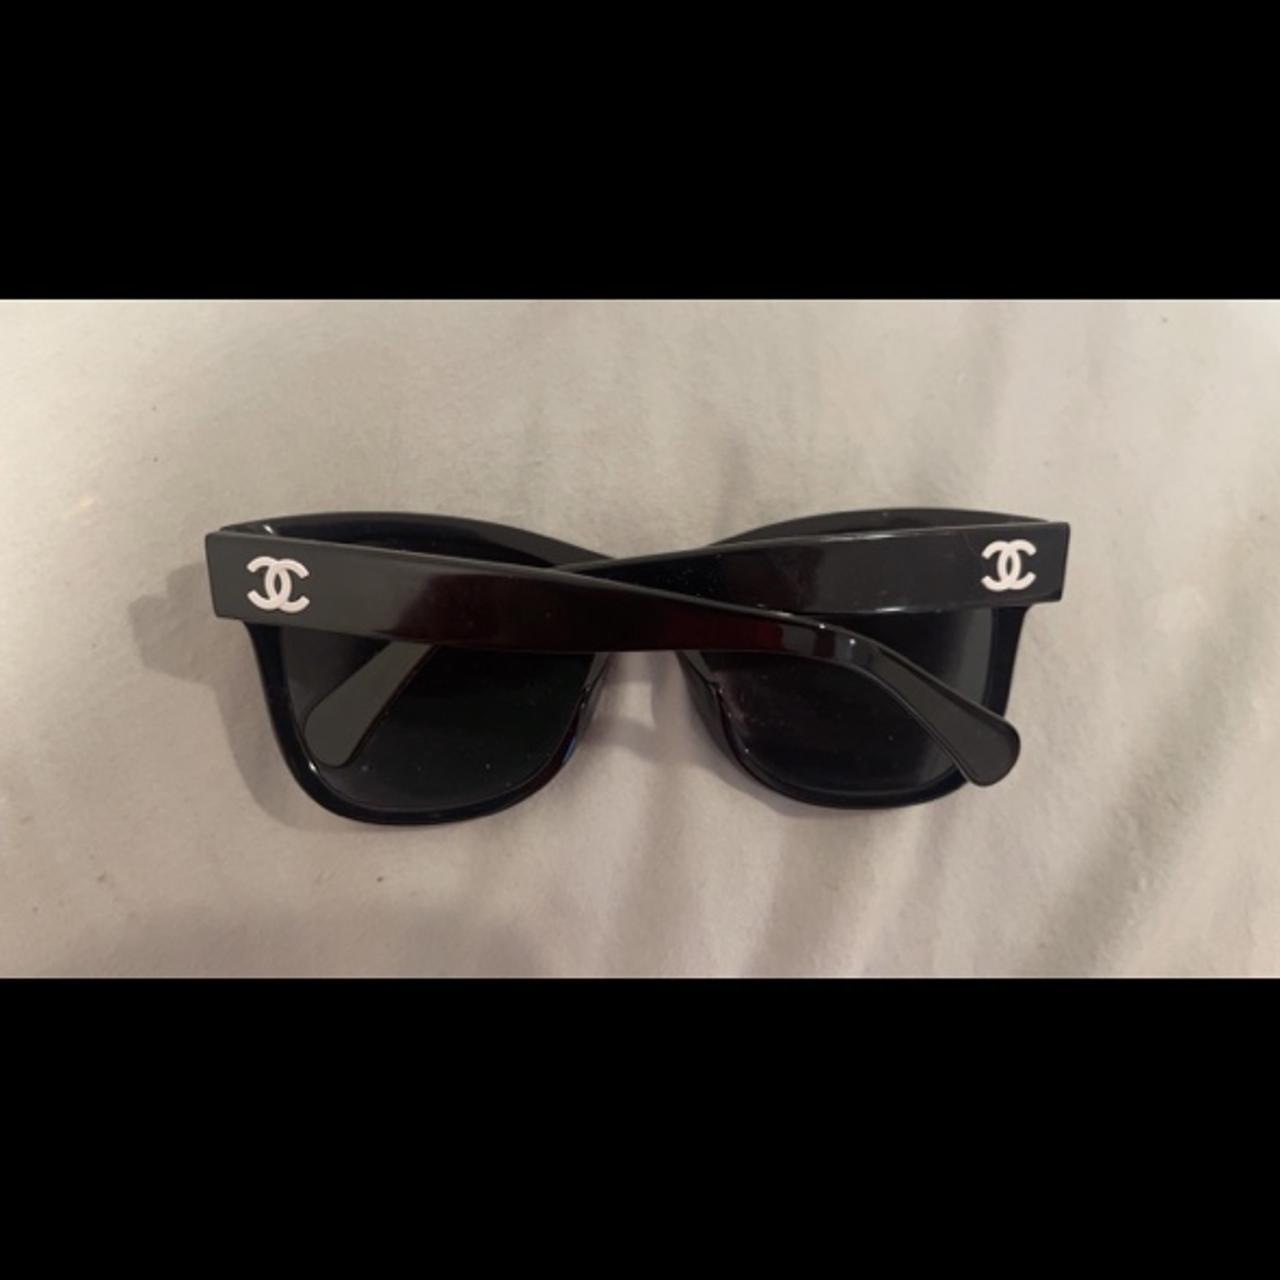 Chanel classic black sunglasses. Pearl on the side